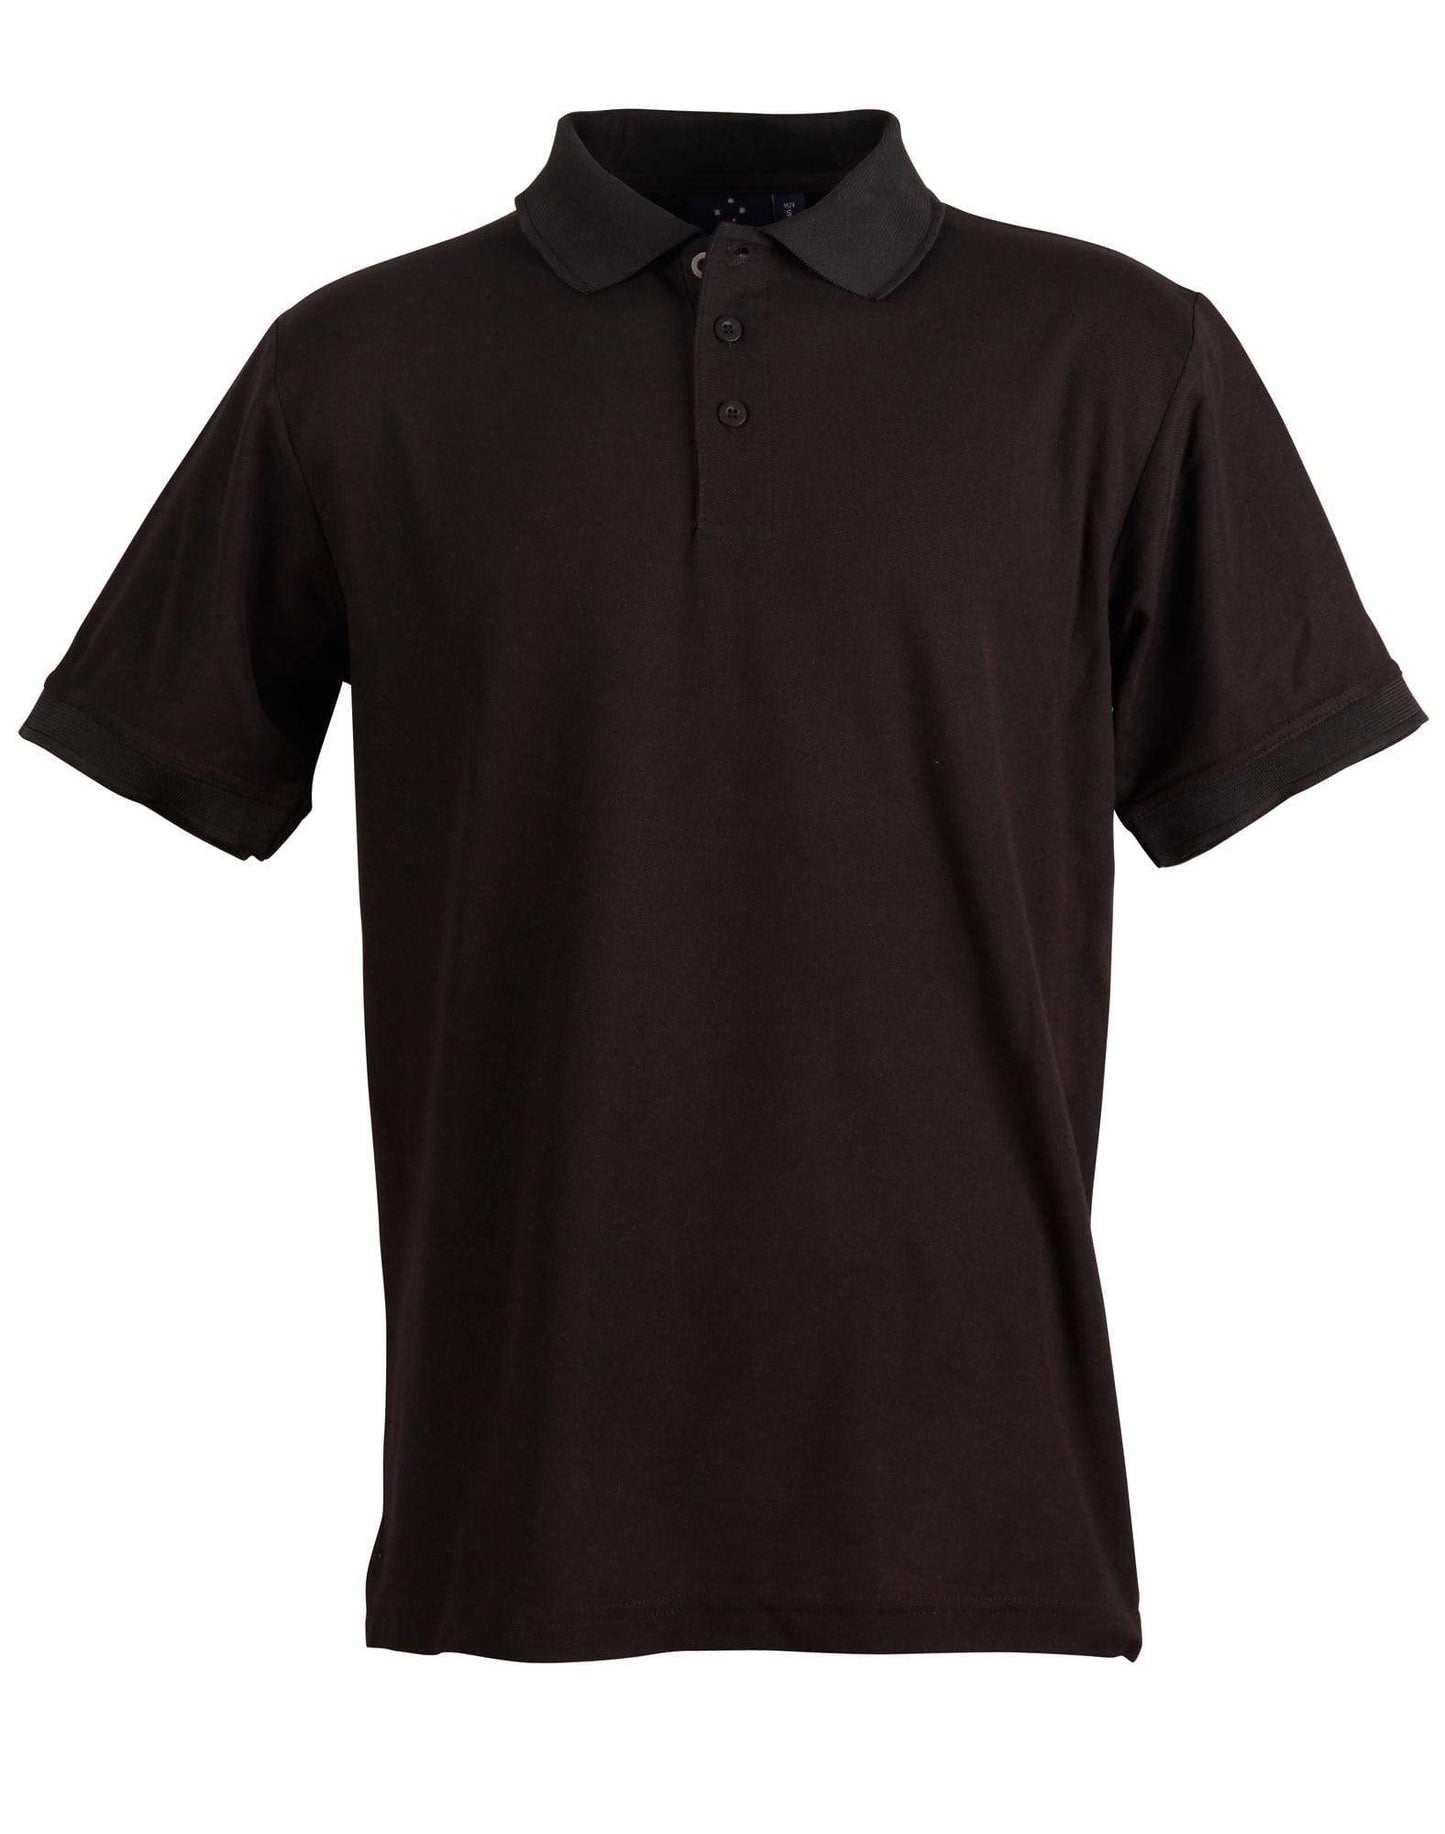 Connection Polo Men's Ps63 Casual Wear Winning Spirit Black S 